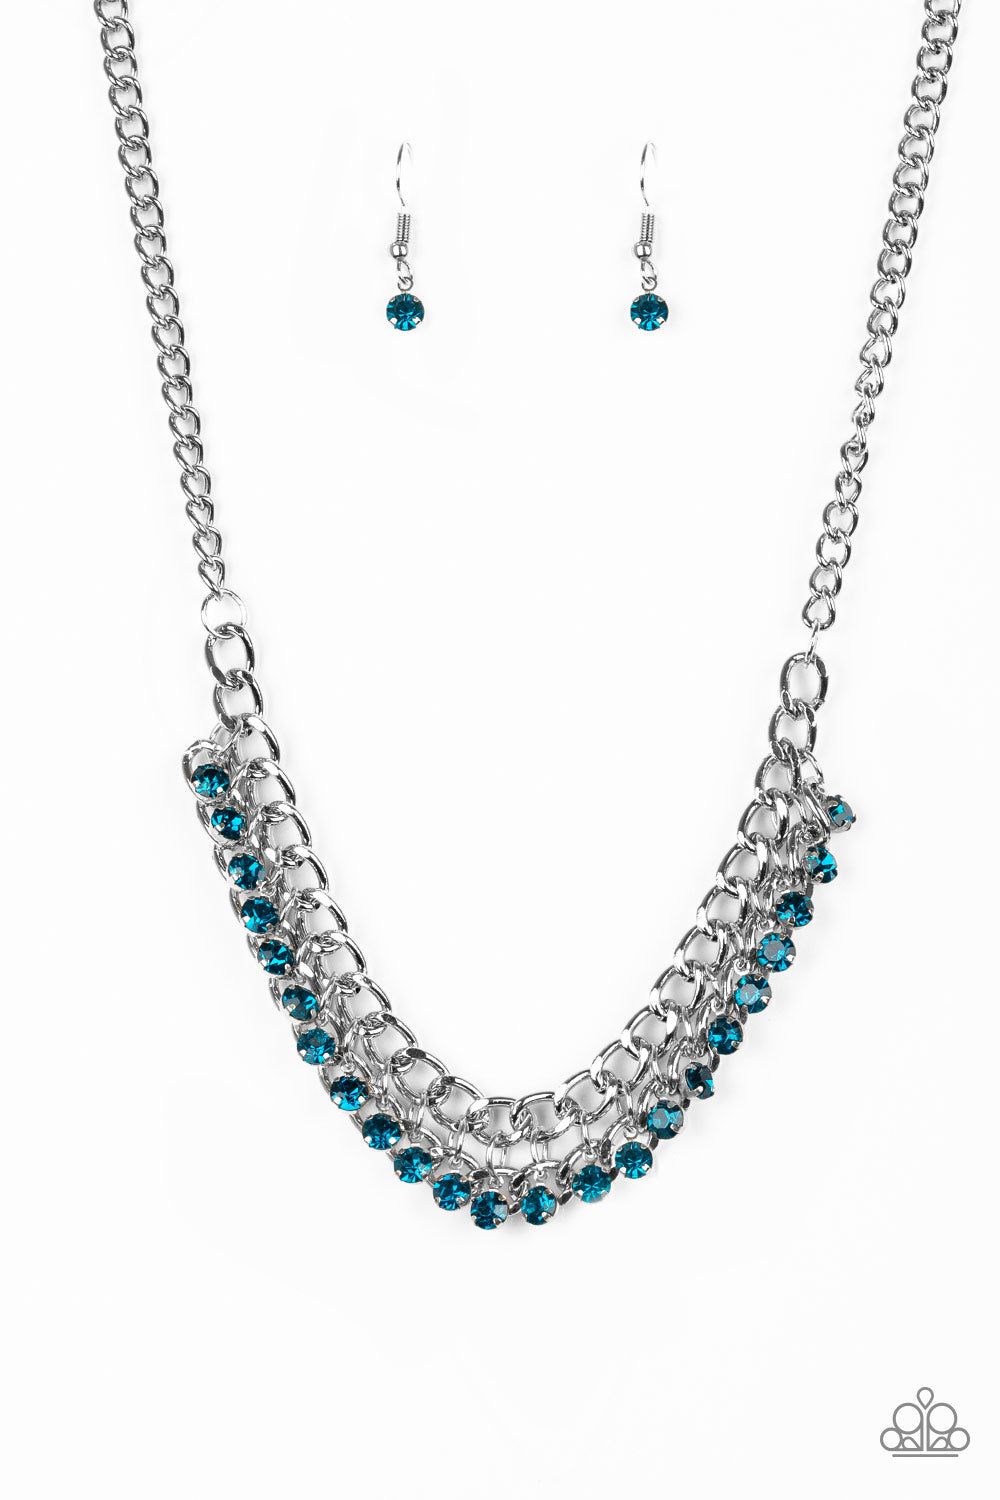 Paparazzi Glow and Grind Blue Necklace. Get Free Shipping. #P2RE-BLXX-211XX.